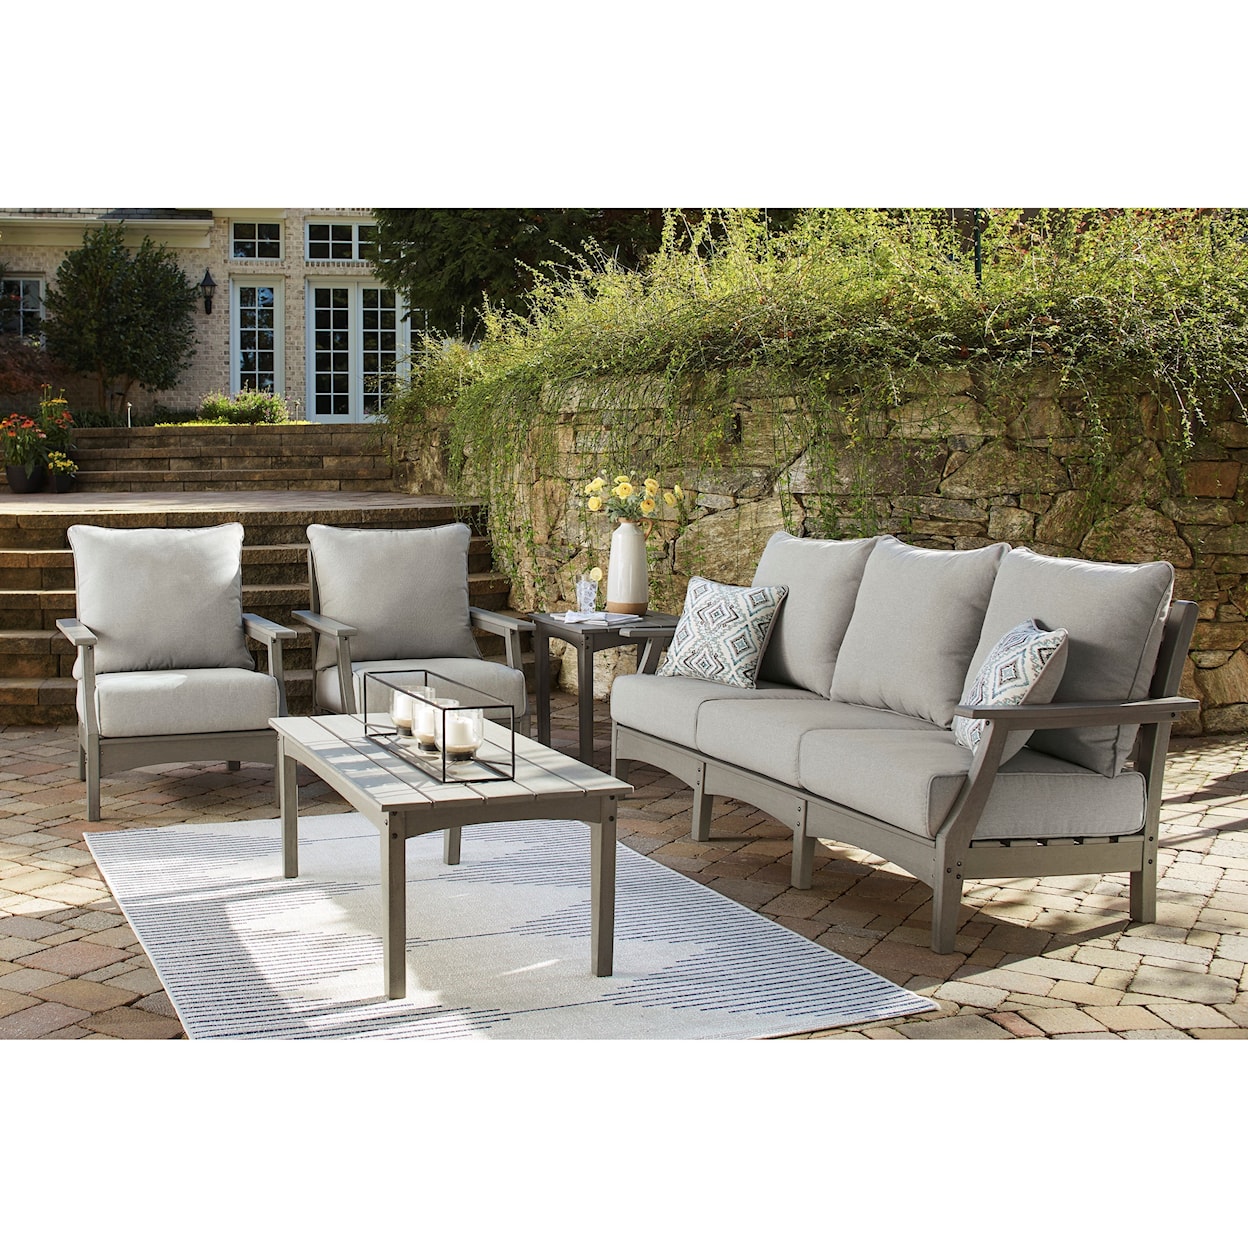 Benchcraft Visola Outdoor Sofa, 2 Chairs, and Table Set